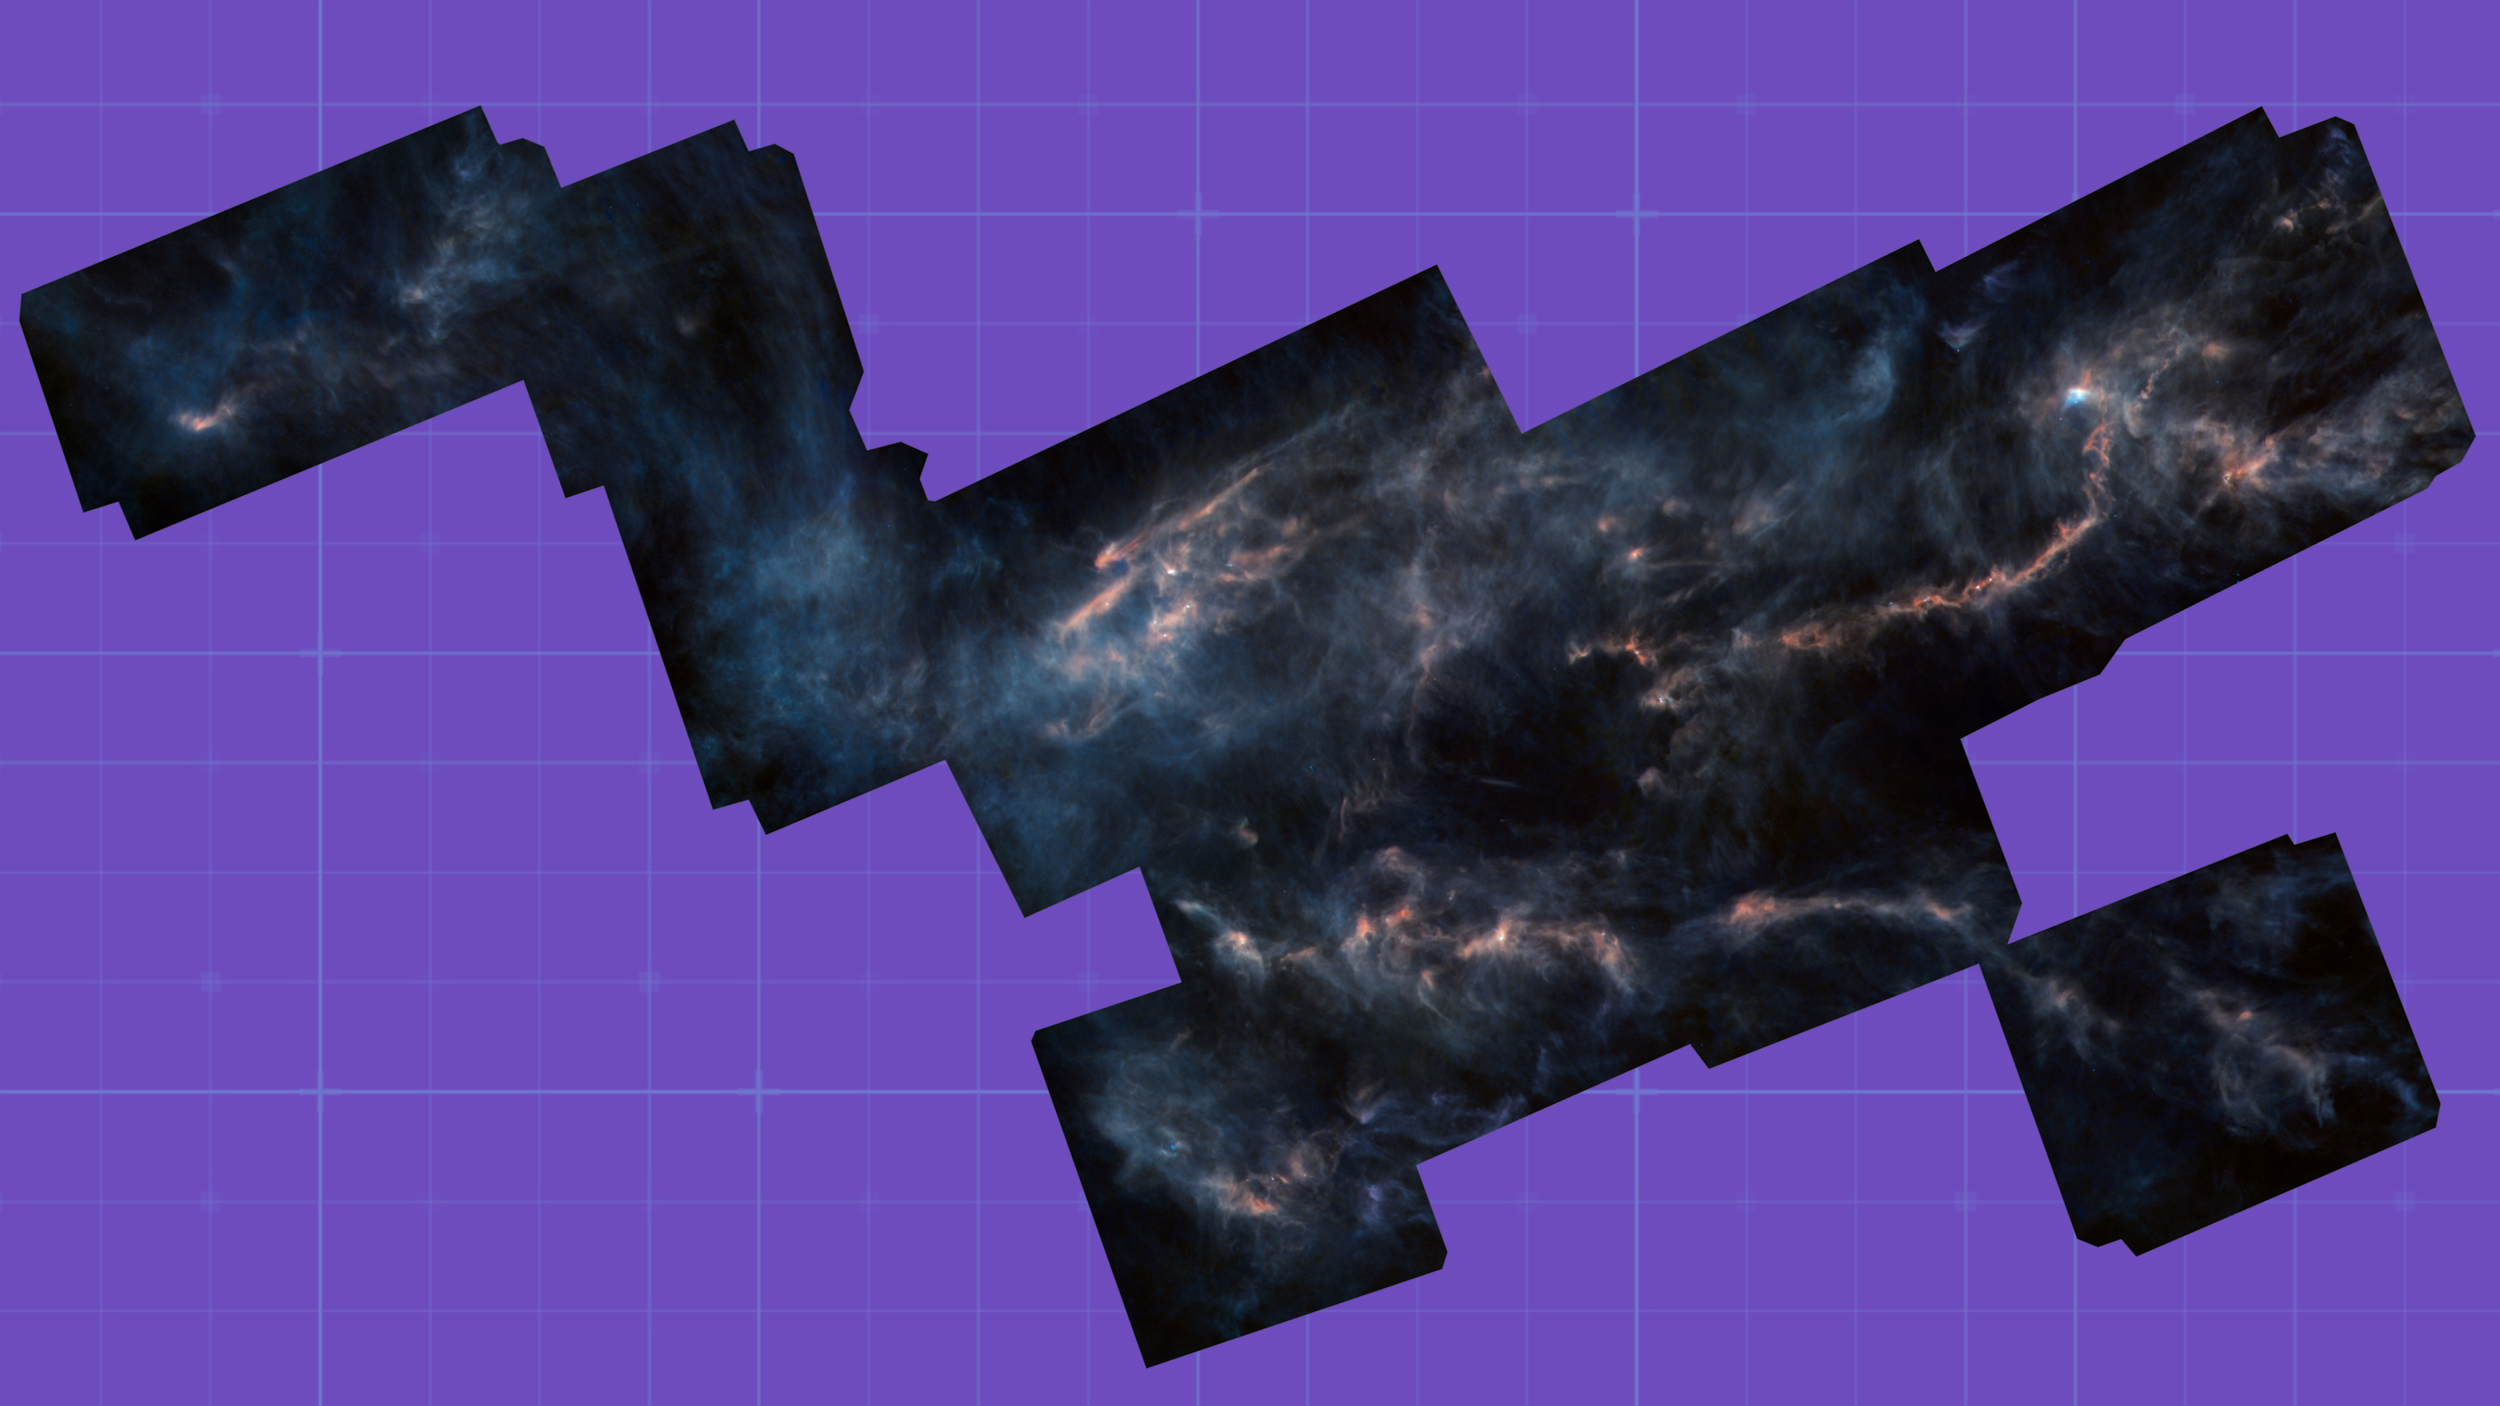 Digital artwork of celestial nebula texture applied to a tessellated shape on a purple grid background, where no stars existed.